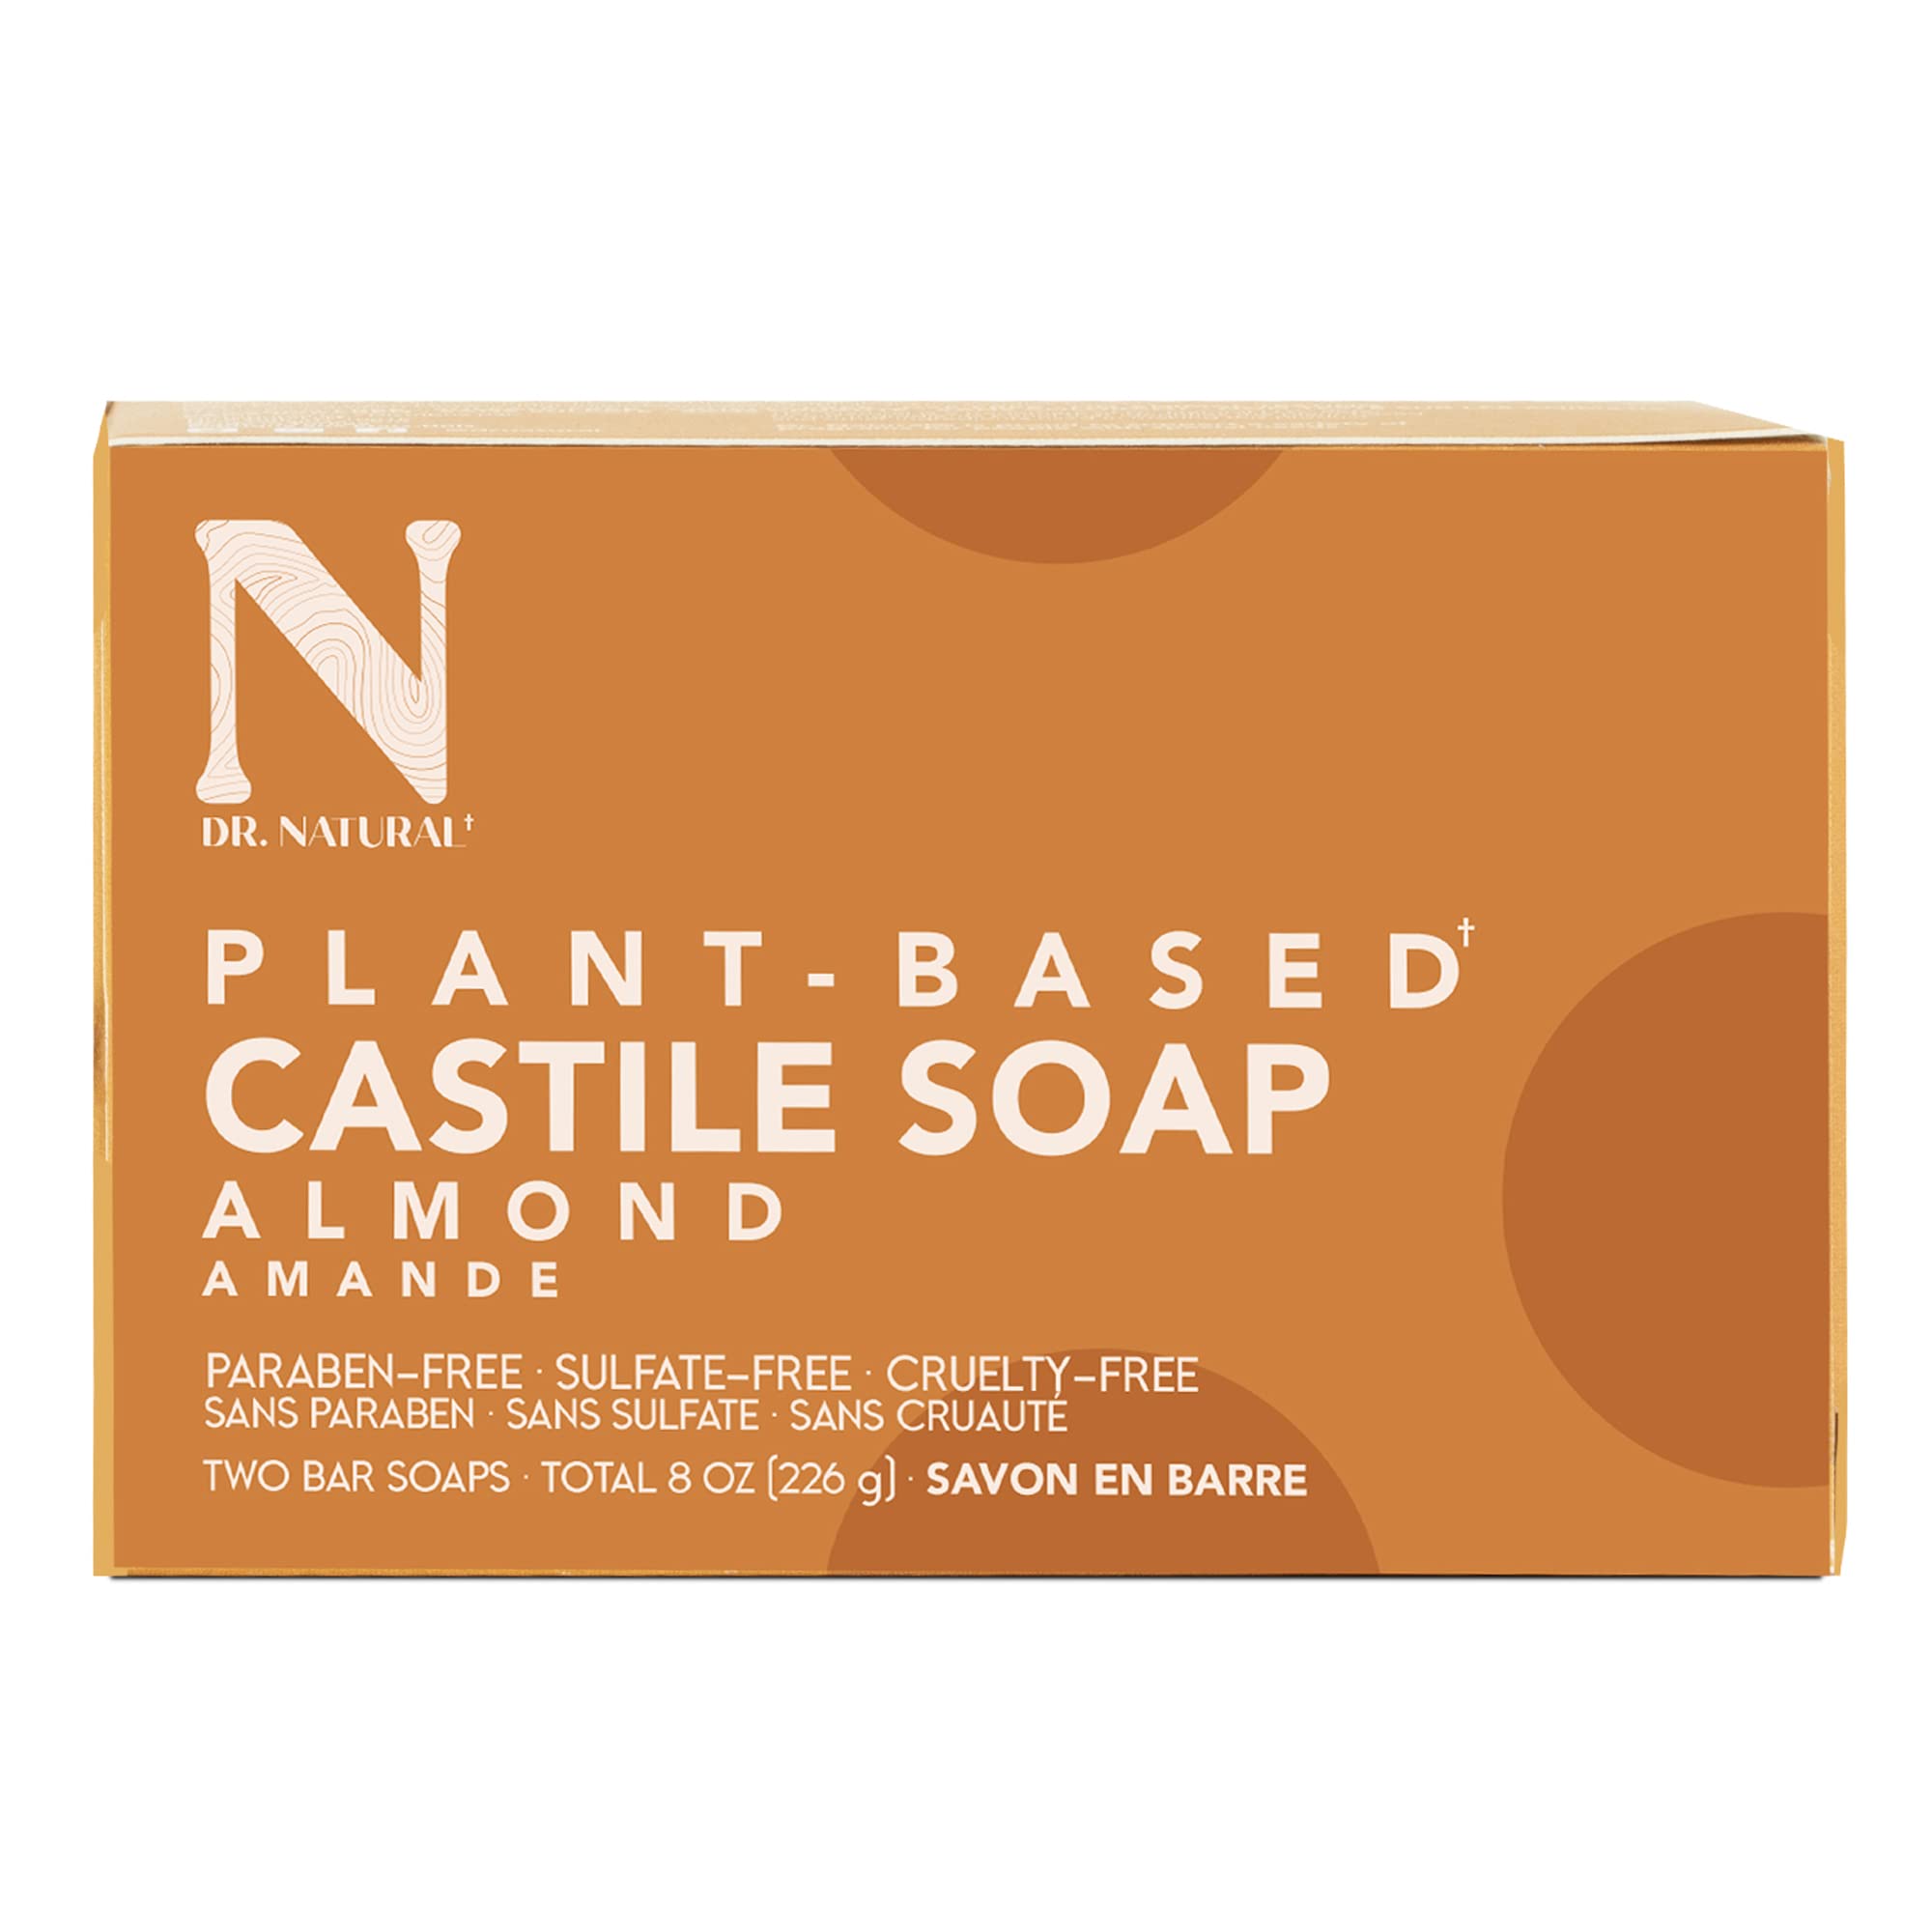 Dr. Natural Almond Castile Bar Soap, 4 ounce Bars, 2-Pack - Made with Essential Oils and Shea Butter, Ultra-Moisturizing Body wash, Facial Cleanser or Hand Soap